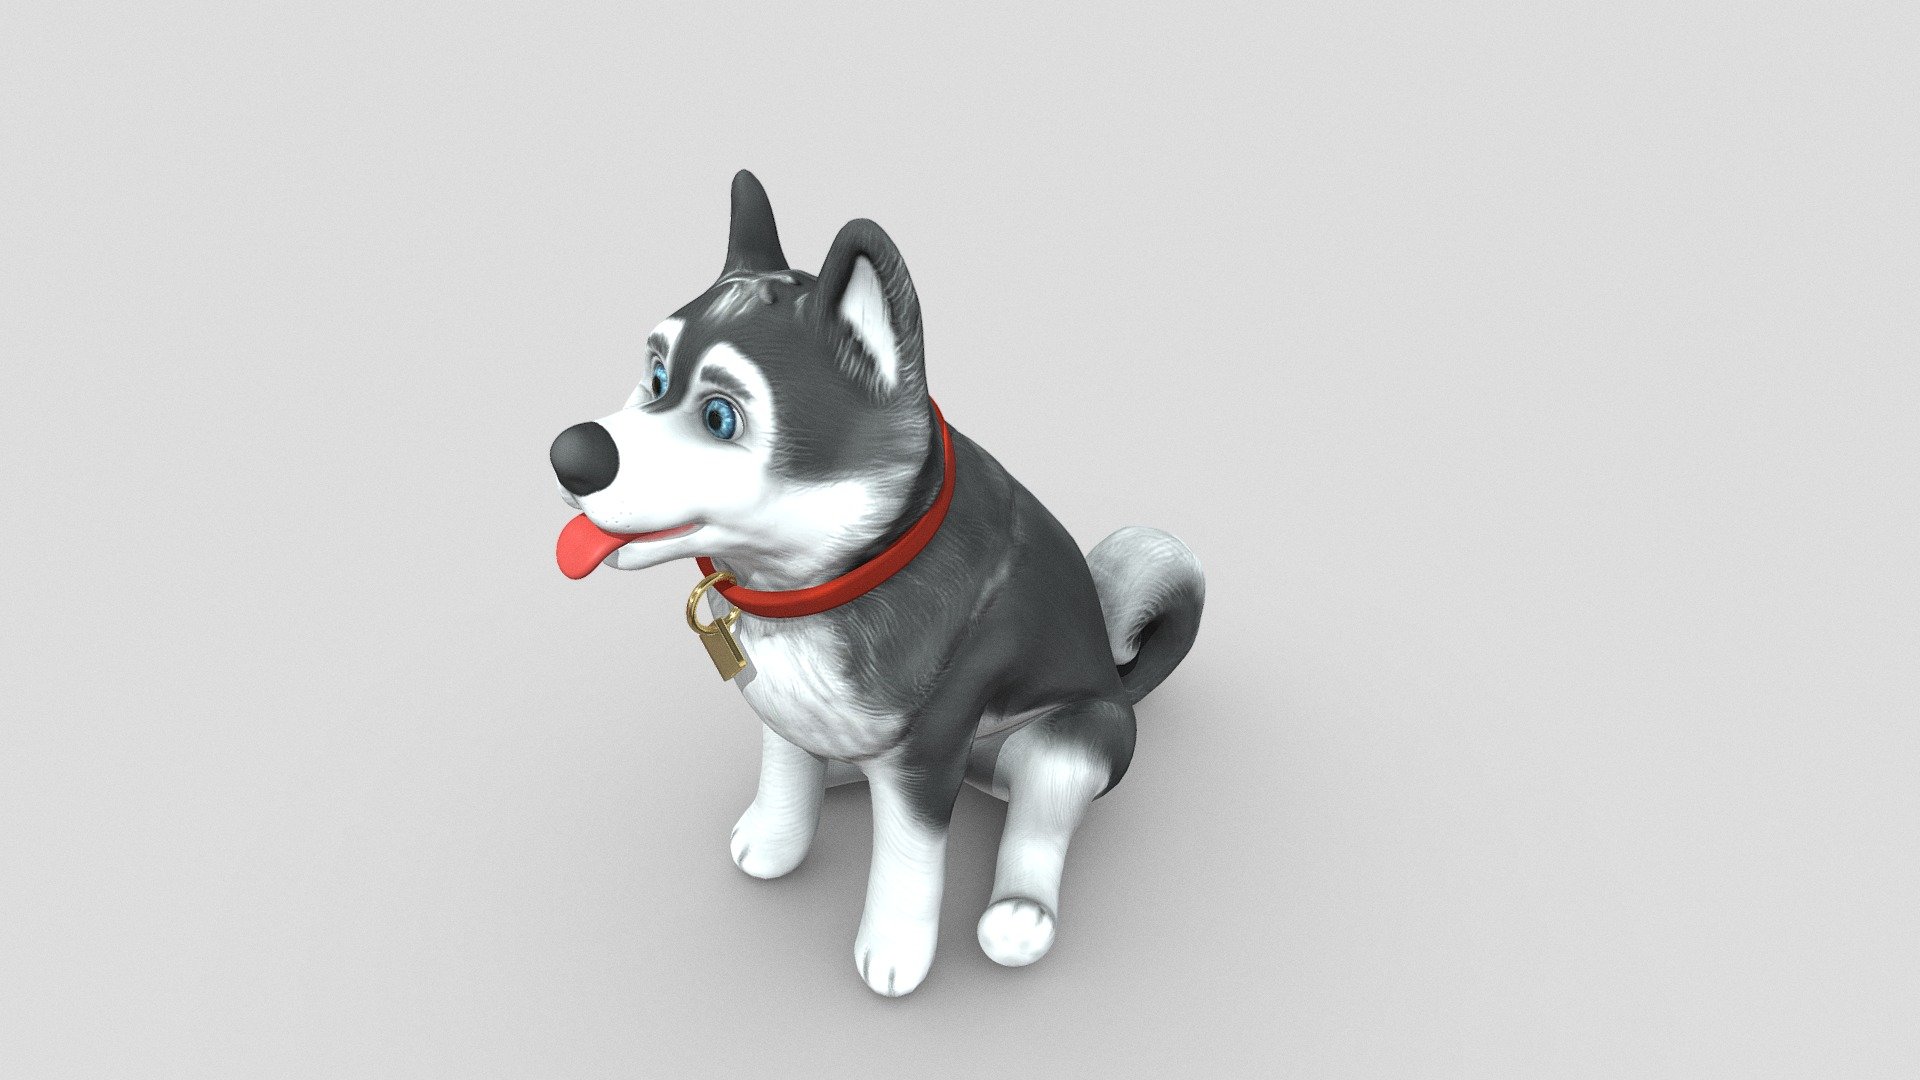 This is a Game ready low poly model of Cartoon Dog Sitting

This model is suitable for use in (game engines, broadcast, high-res film closeups, advertising, animations, visualizations)

FEATURES:

-High-quality polygonal model
-Models resolutions are optimized for polygon efficiency
-Model is fully textured with all materials applied (V-ray)
-No special plugin needed to open scene.
-Fully Unwrapped Uvs, non overllaping
-units used cm

File Formats:
OBJ

TEXTURES
4096x4096 color normal metal rough (pbr) - Cartoony Dog Sitting low poly - Buy Royalty Free 3D model by Pbr_Studio (@pbr.game.ready) 3d model